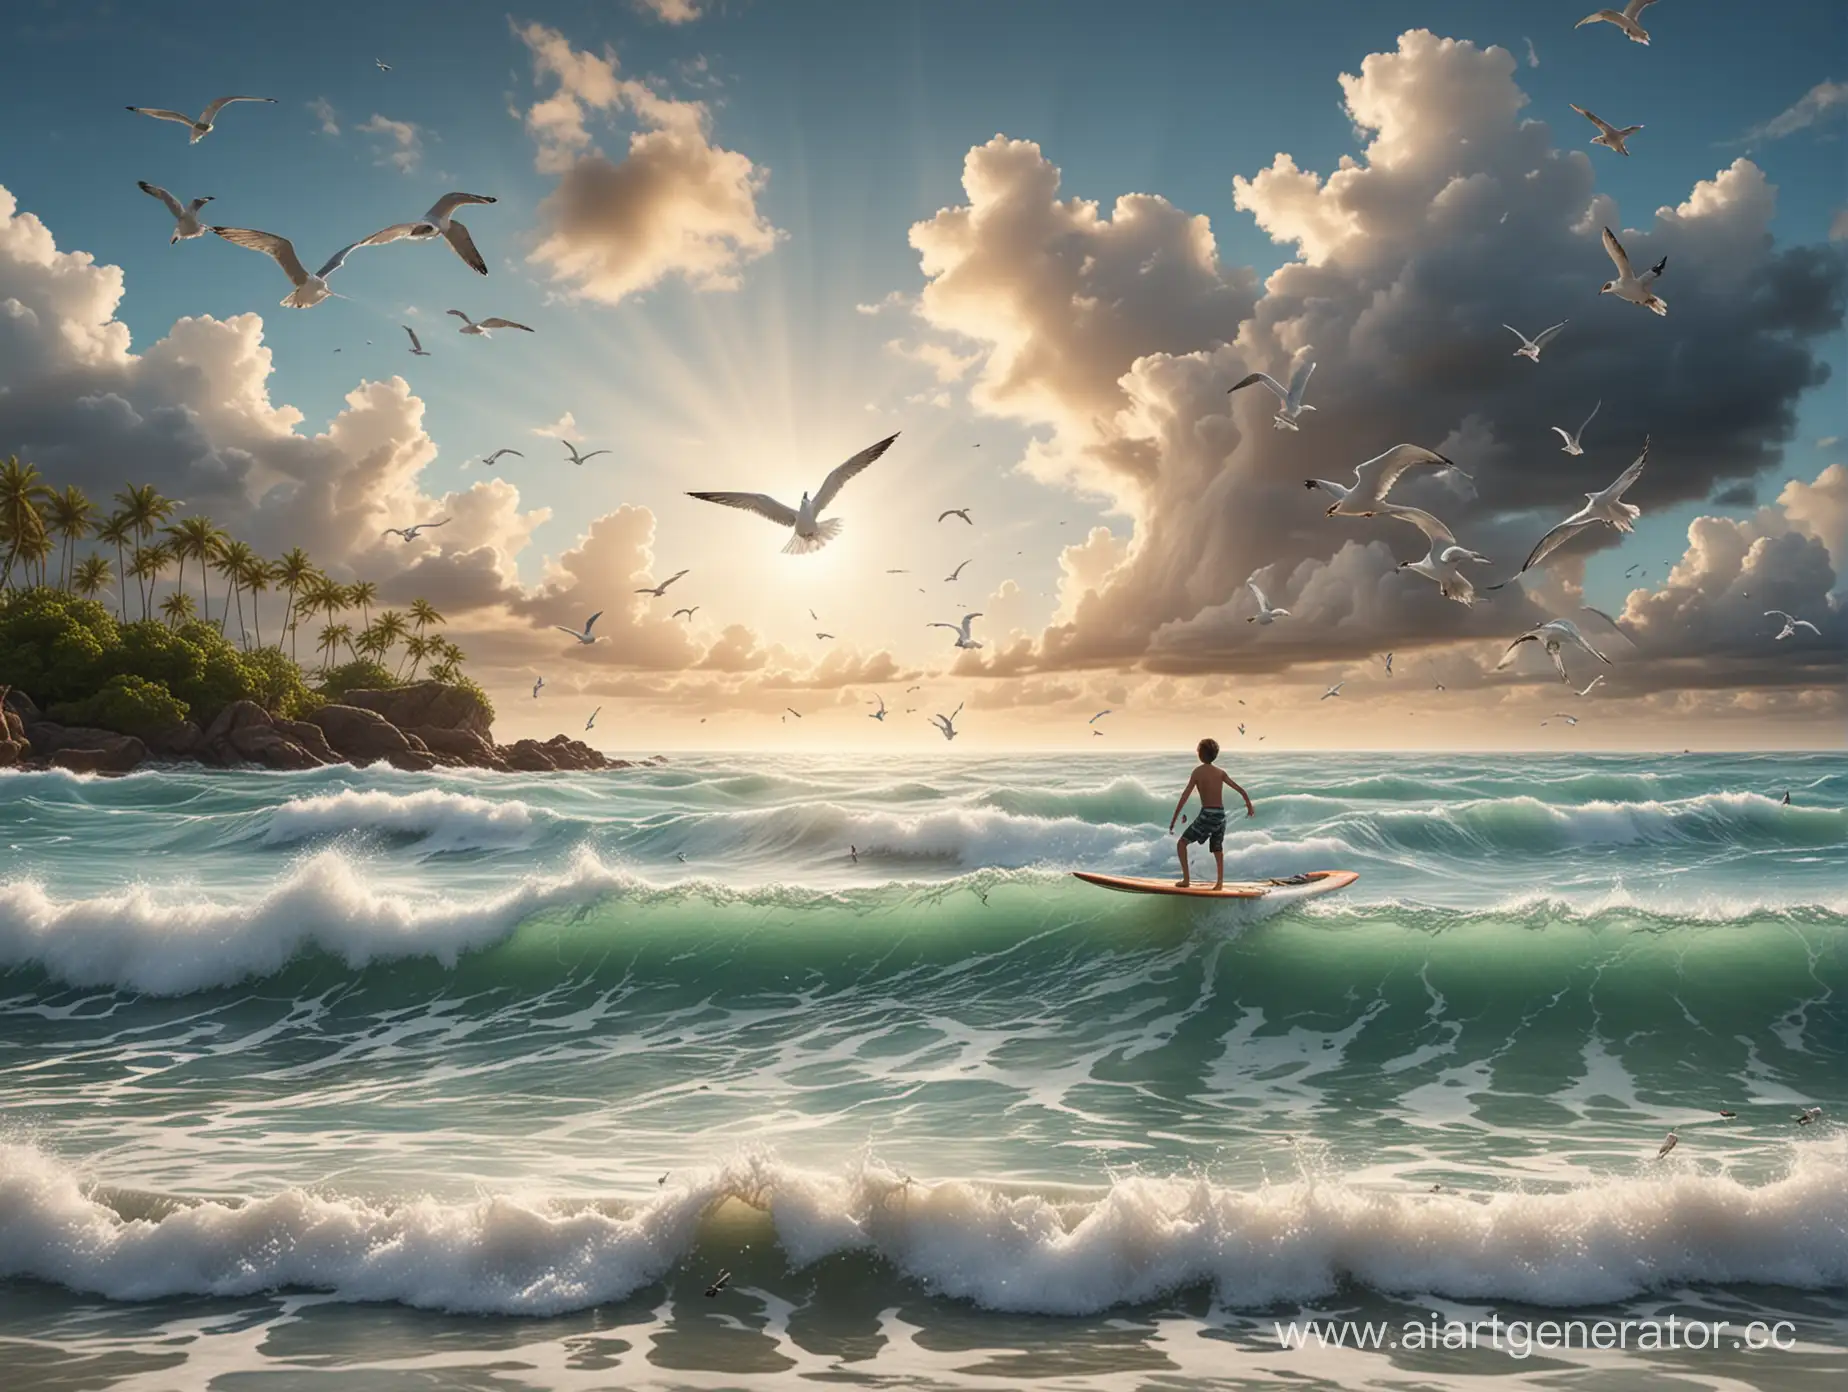 Youthful-Surfer-Riding-Waves-Amid-Seagulls-and-Coral-Island